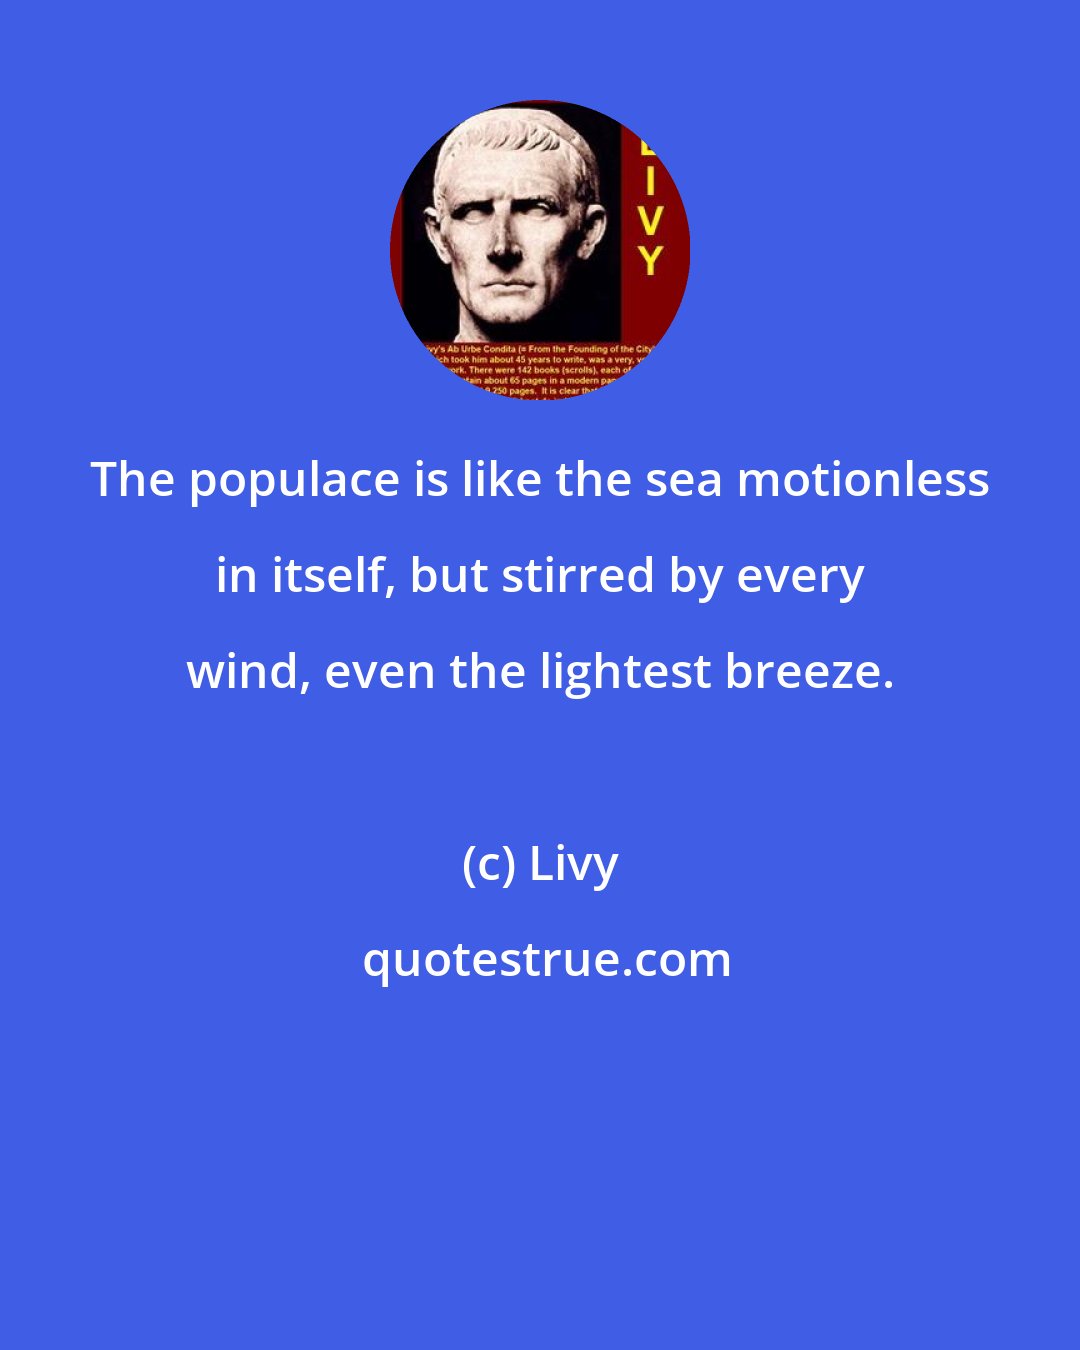 Livy: The populace is like the sea motionless in itself, but stirred by every wind, even the lightest breeze.